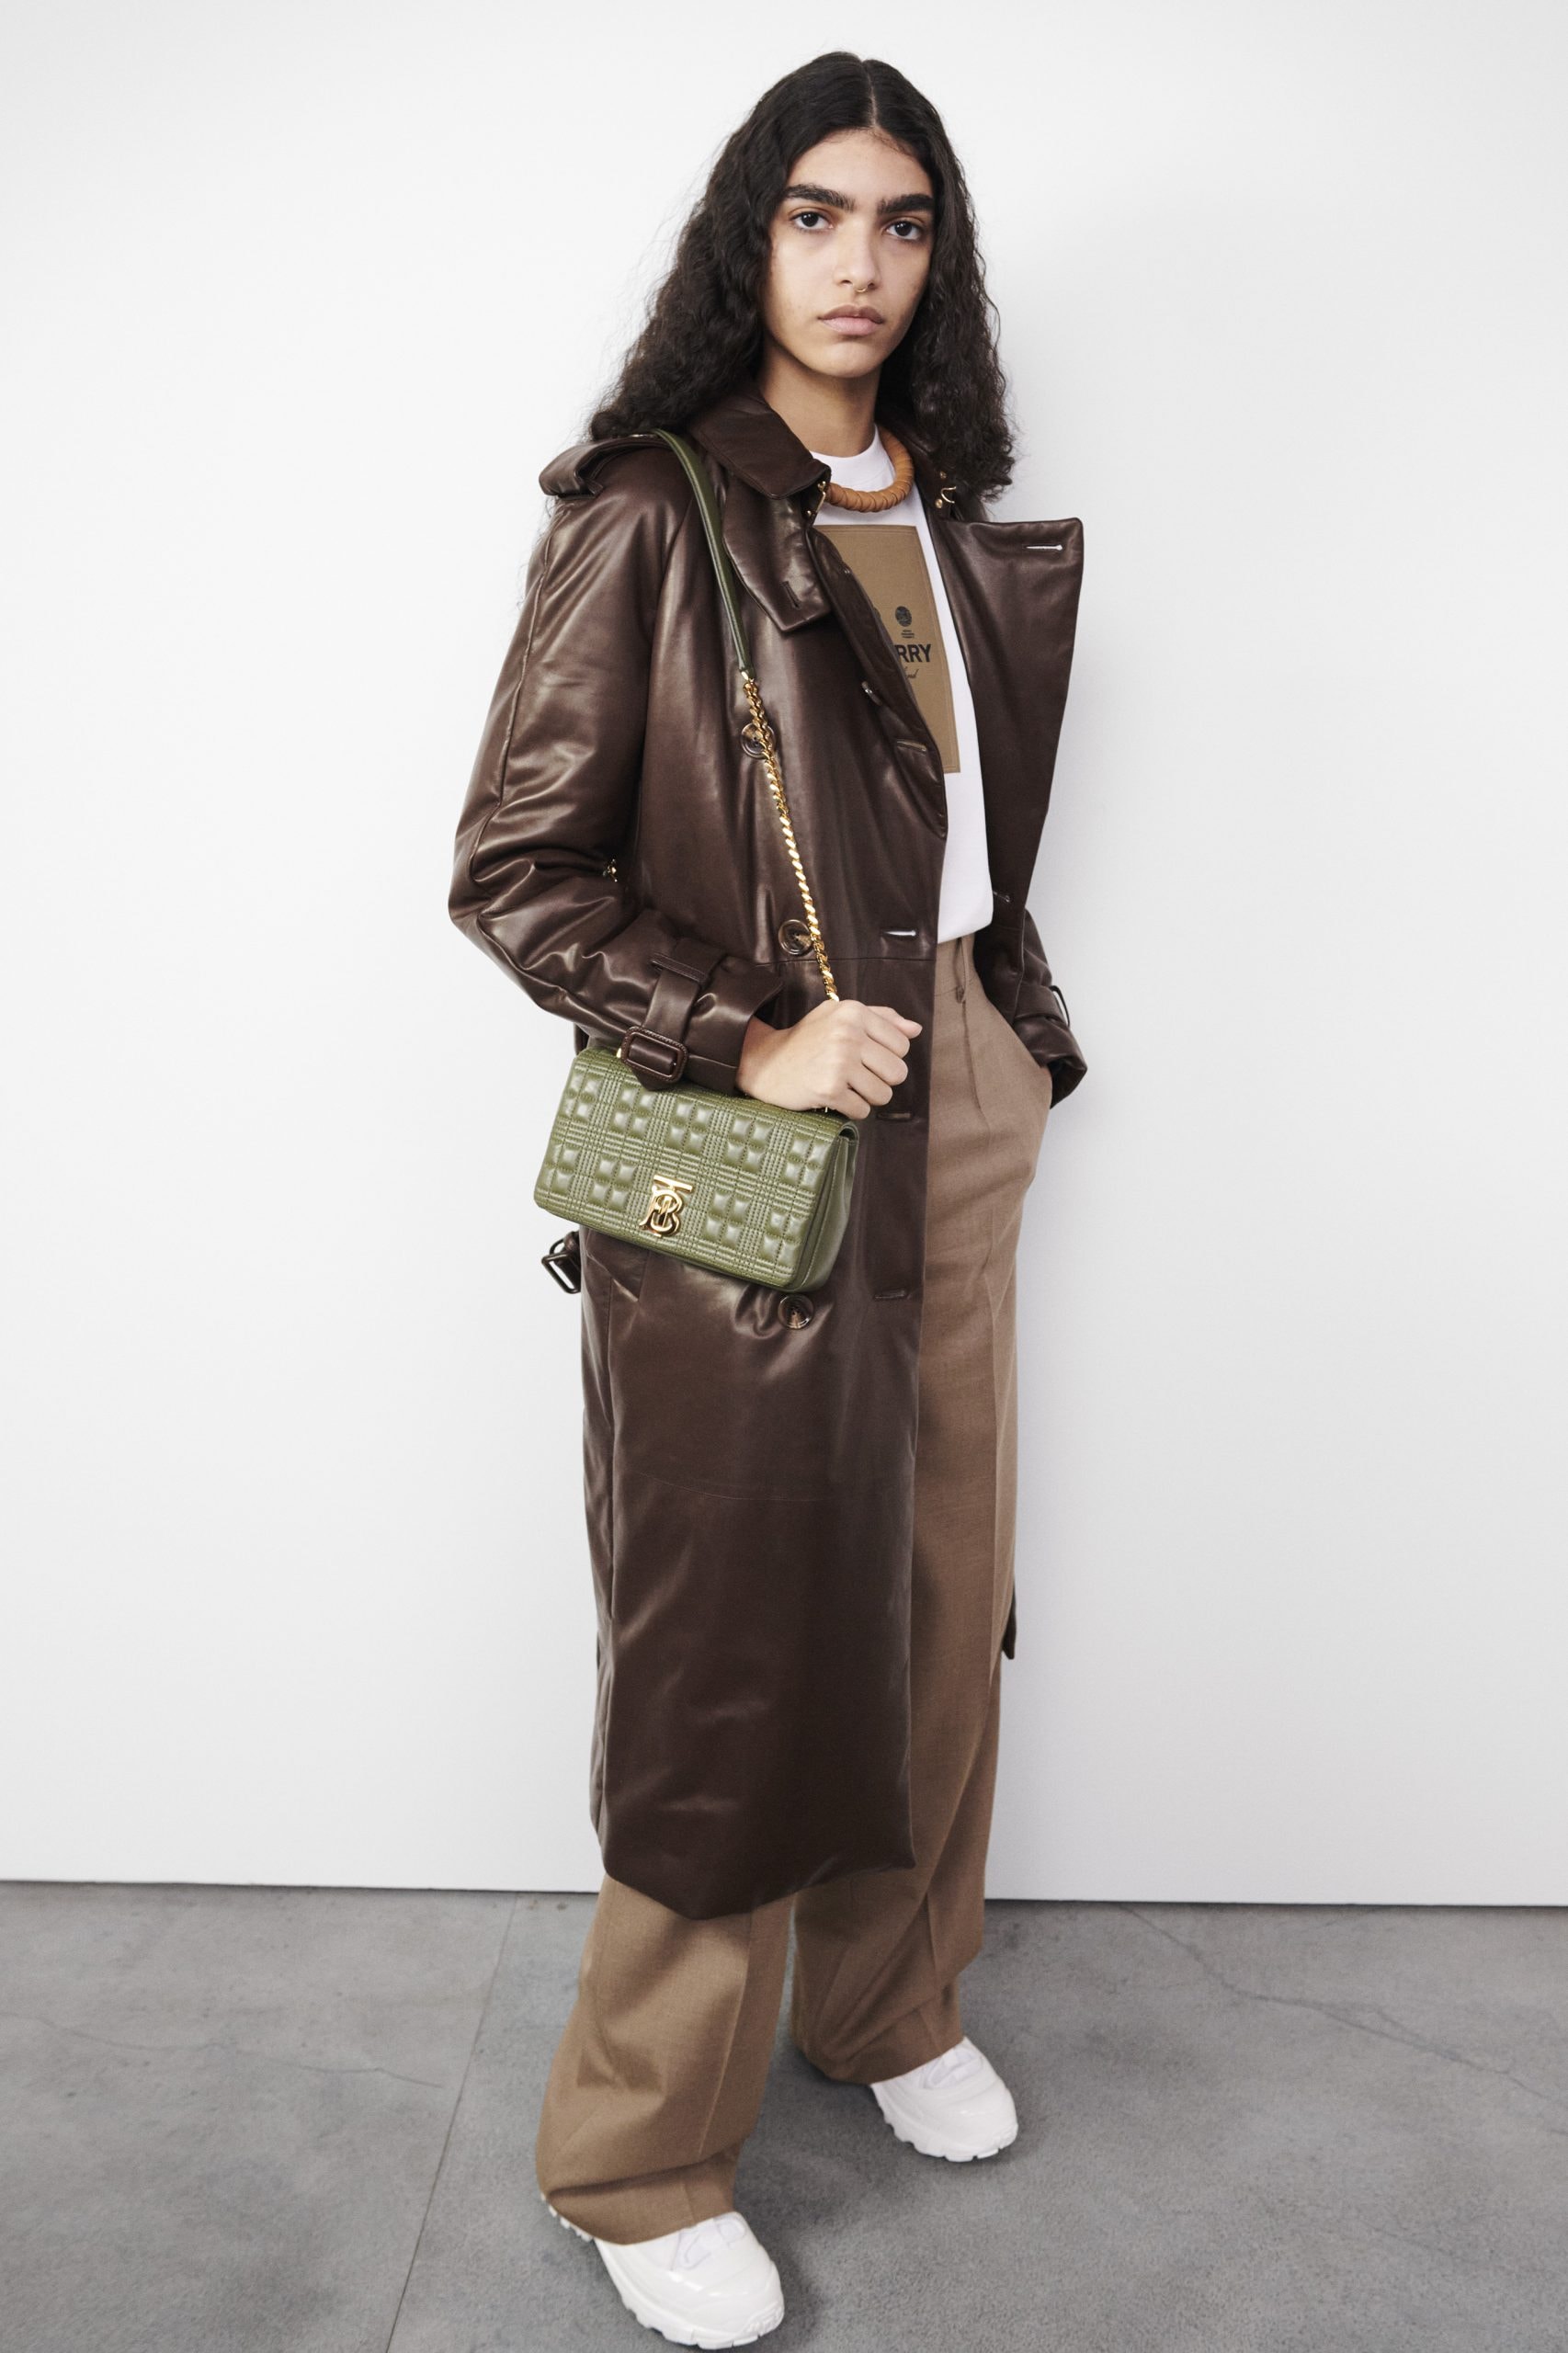 Burberry 2022 pre-fall collection